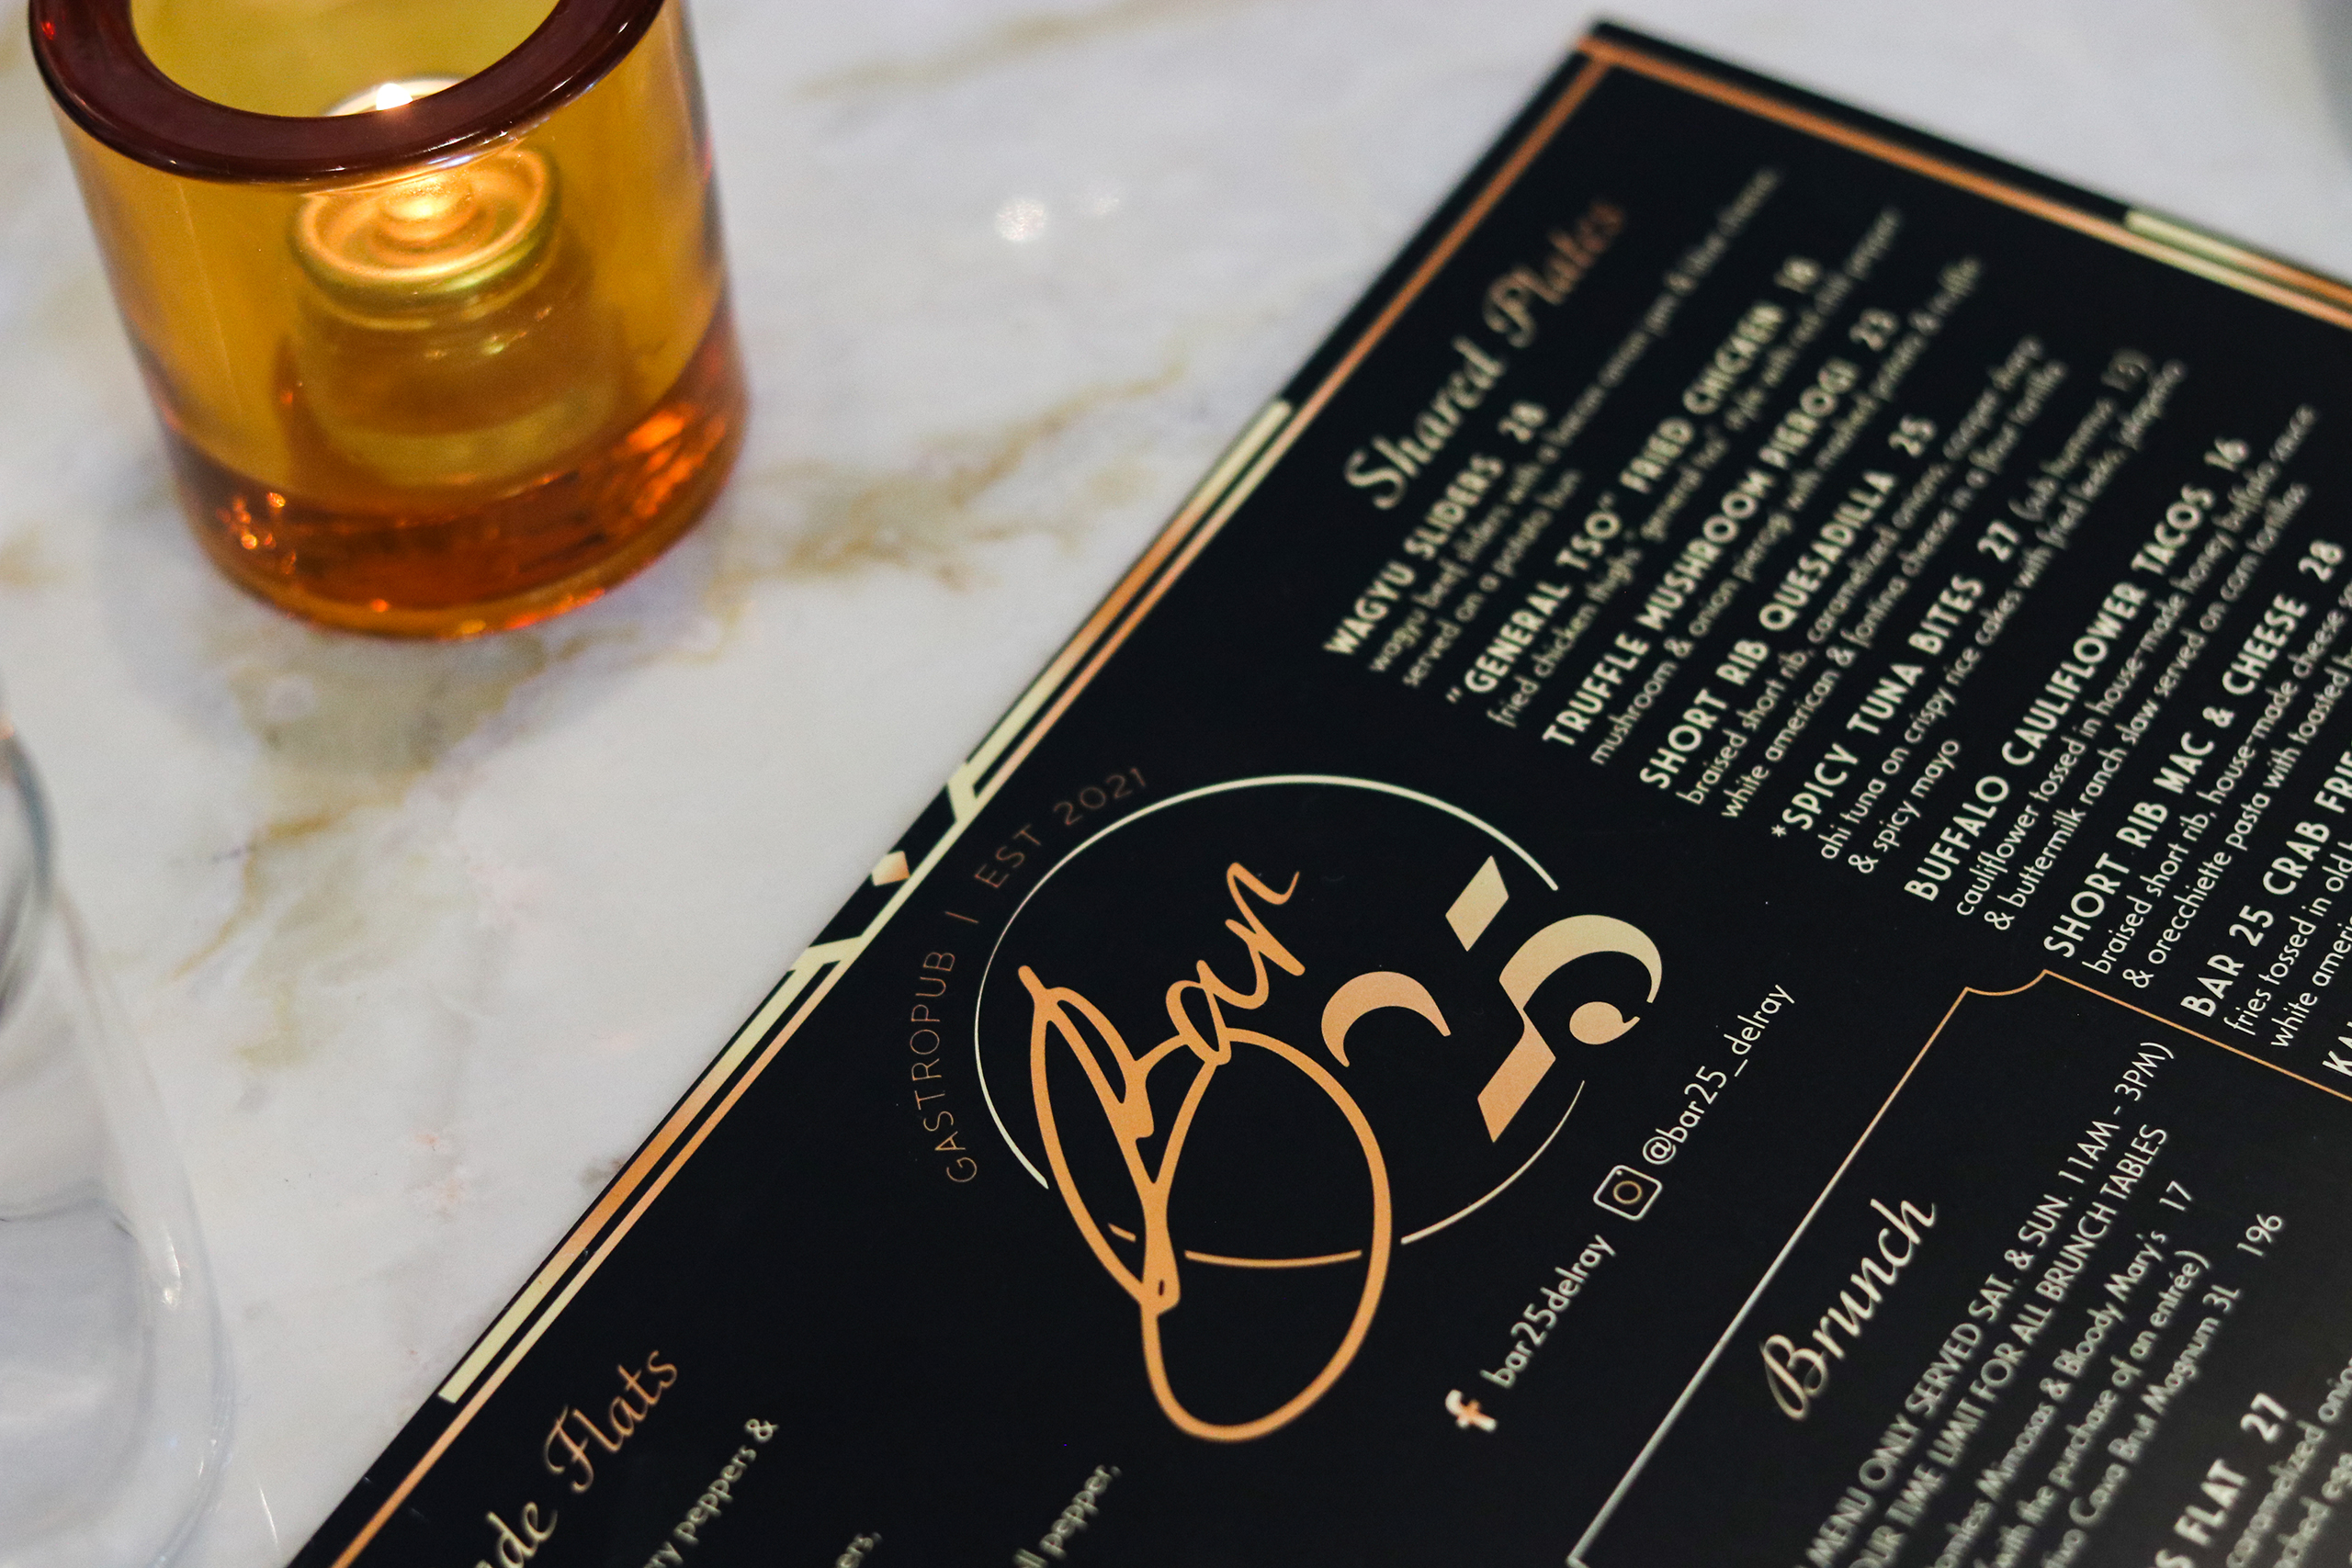 Bar 25 menu, in Delray Beach, FL, placed on marble countertop beside a candle.